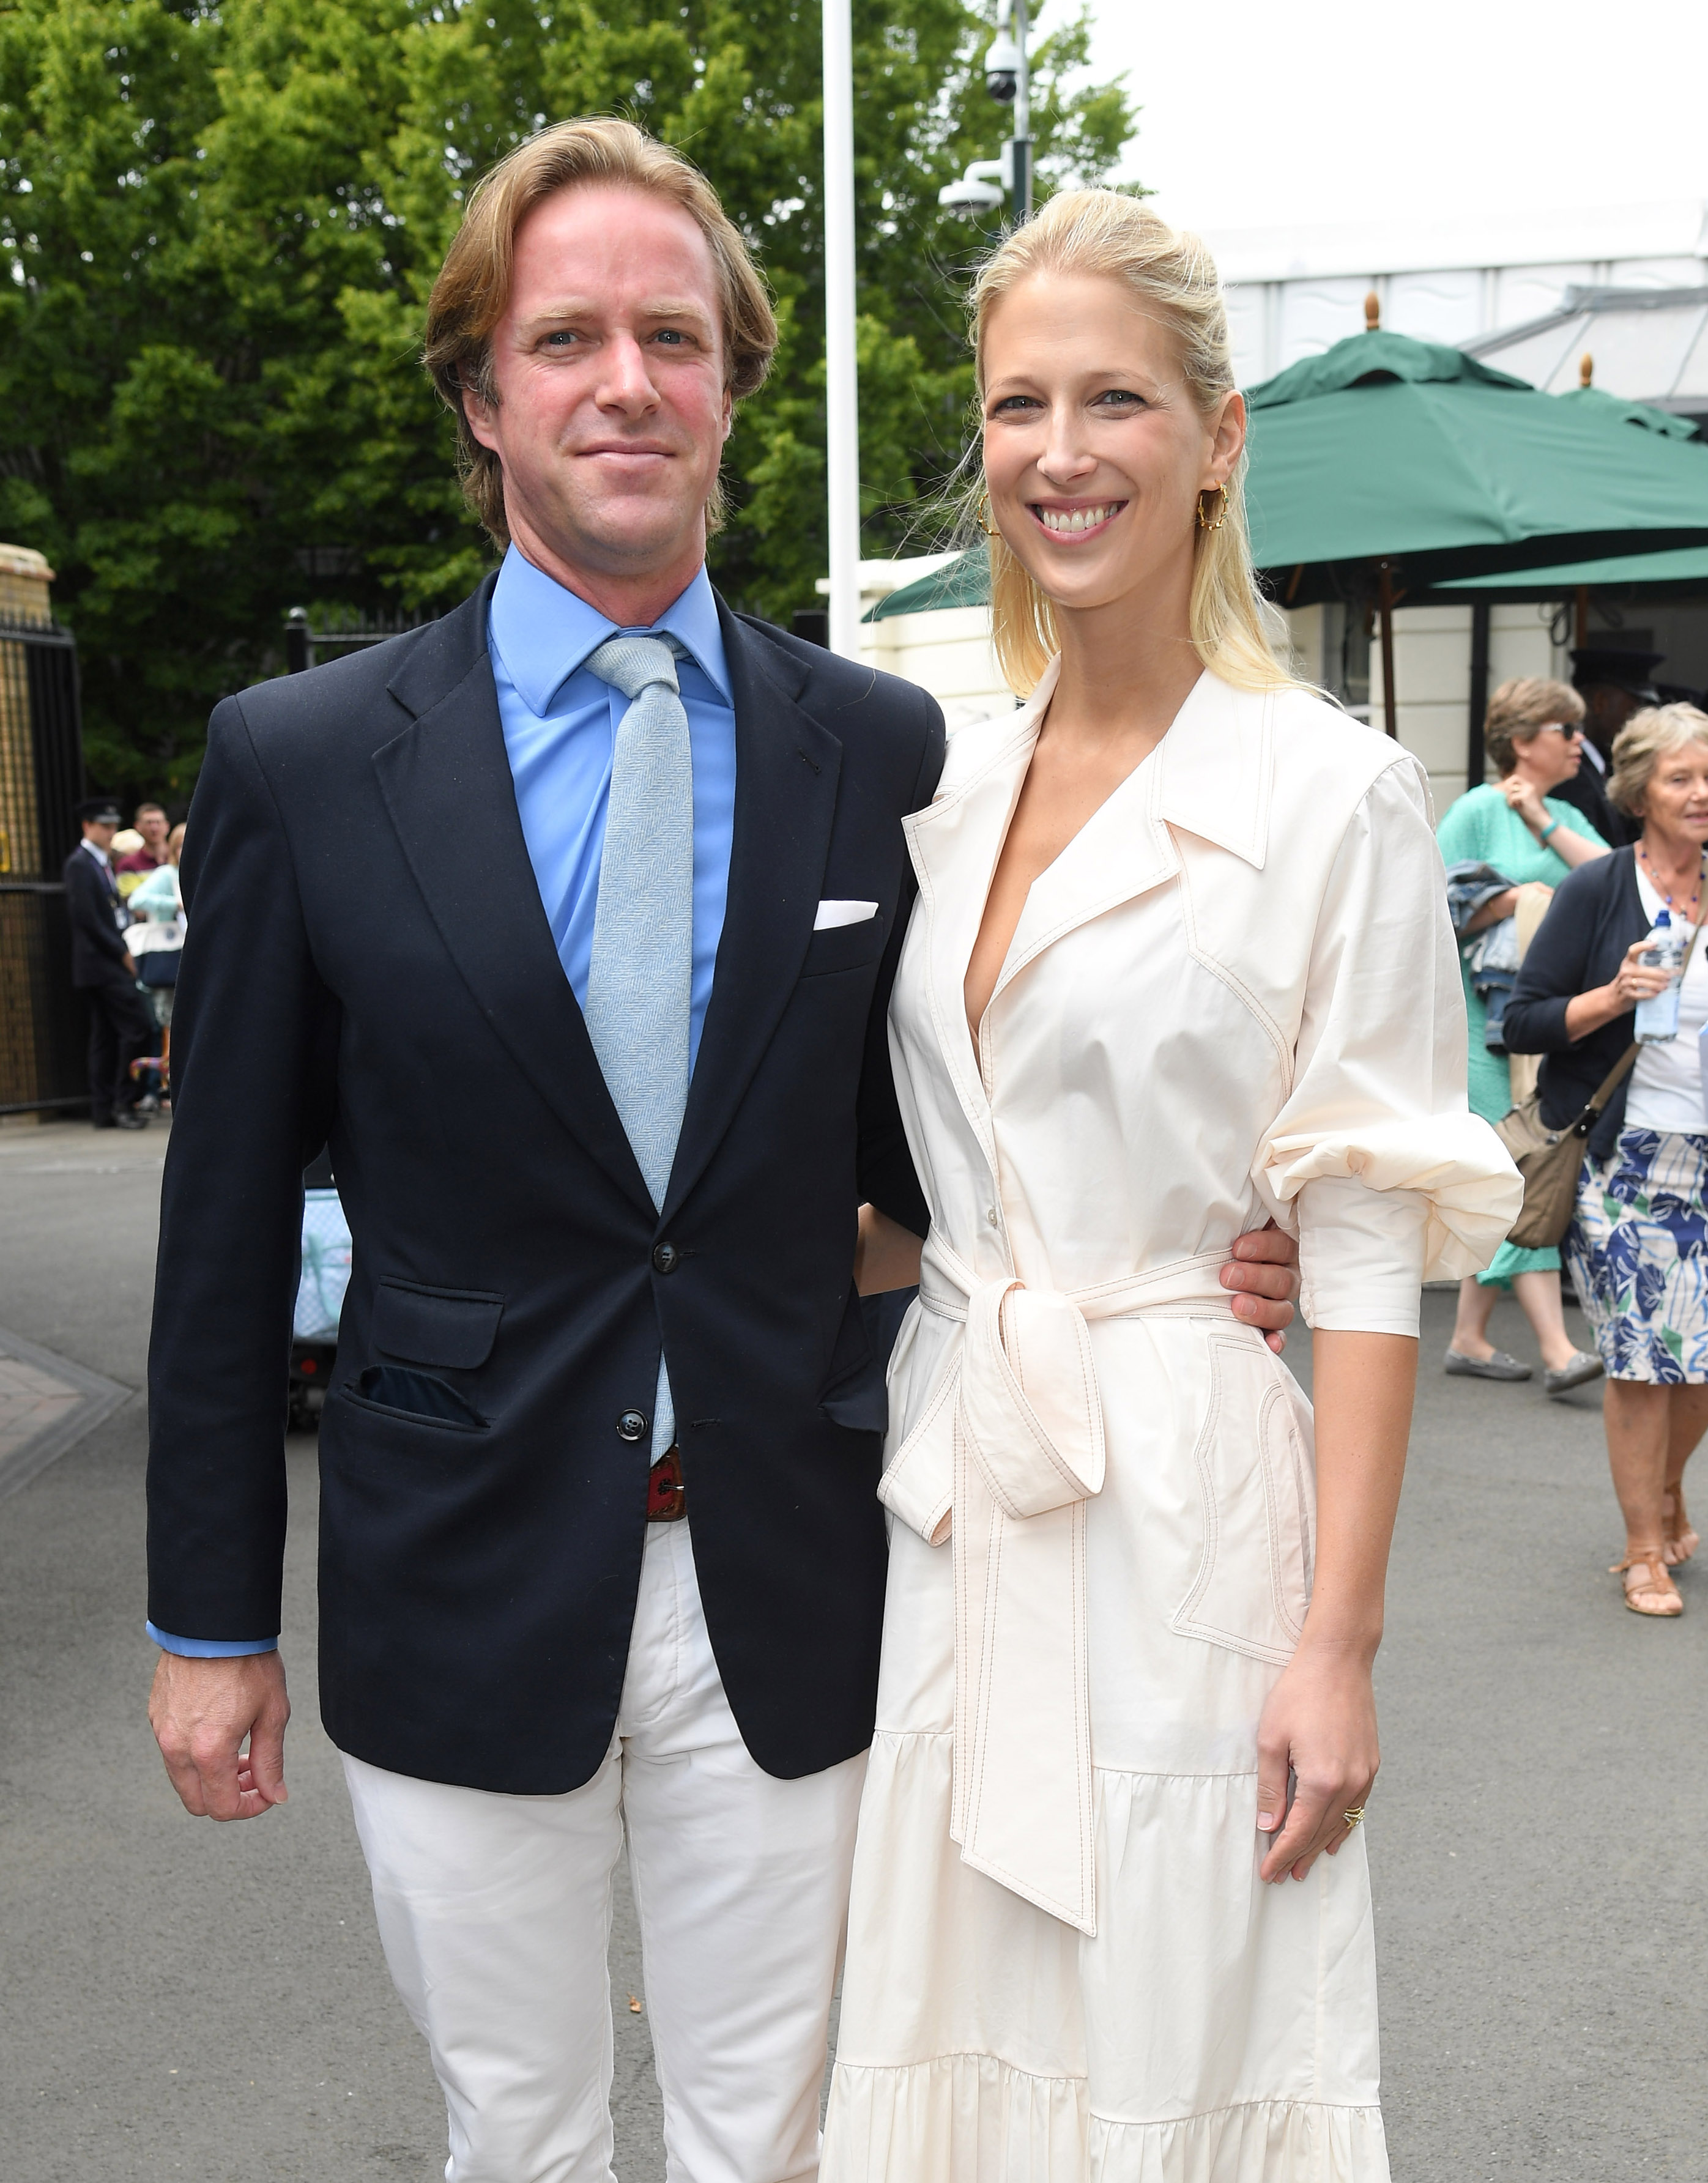 Thomas Kingston and Lady Gabriella at the Wimbledon Tennis Championships in London, England on July 9, 2019 | Source: Getty Images